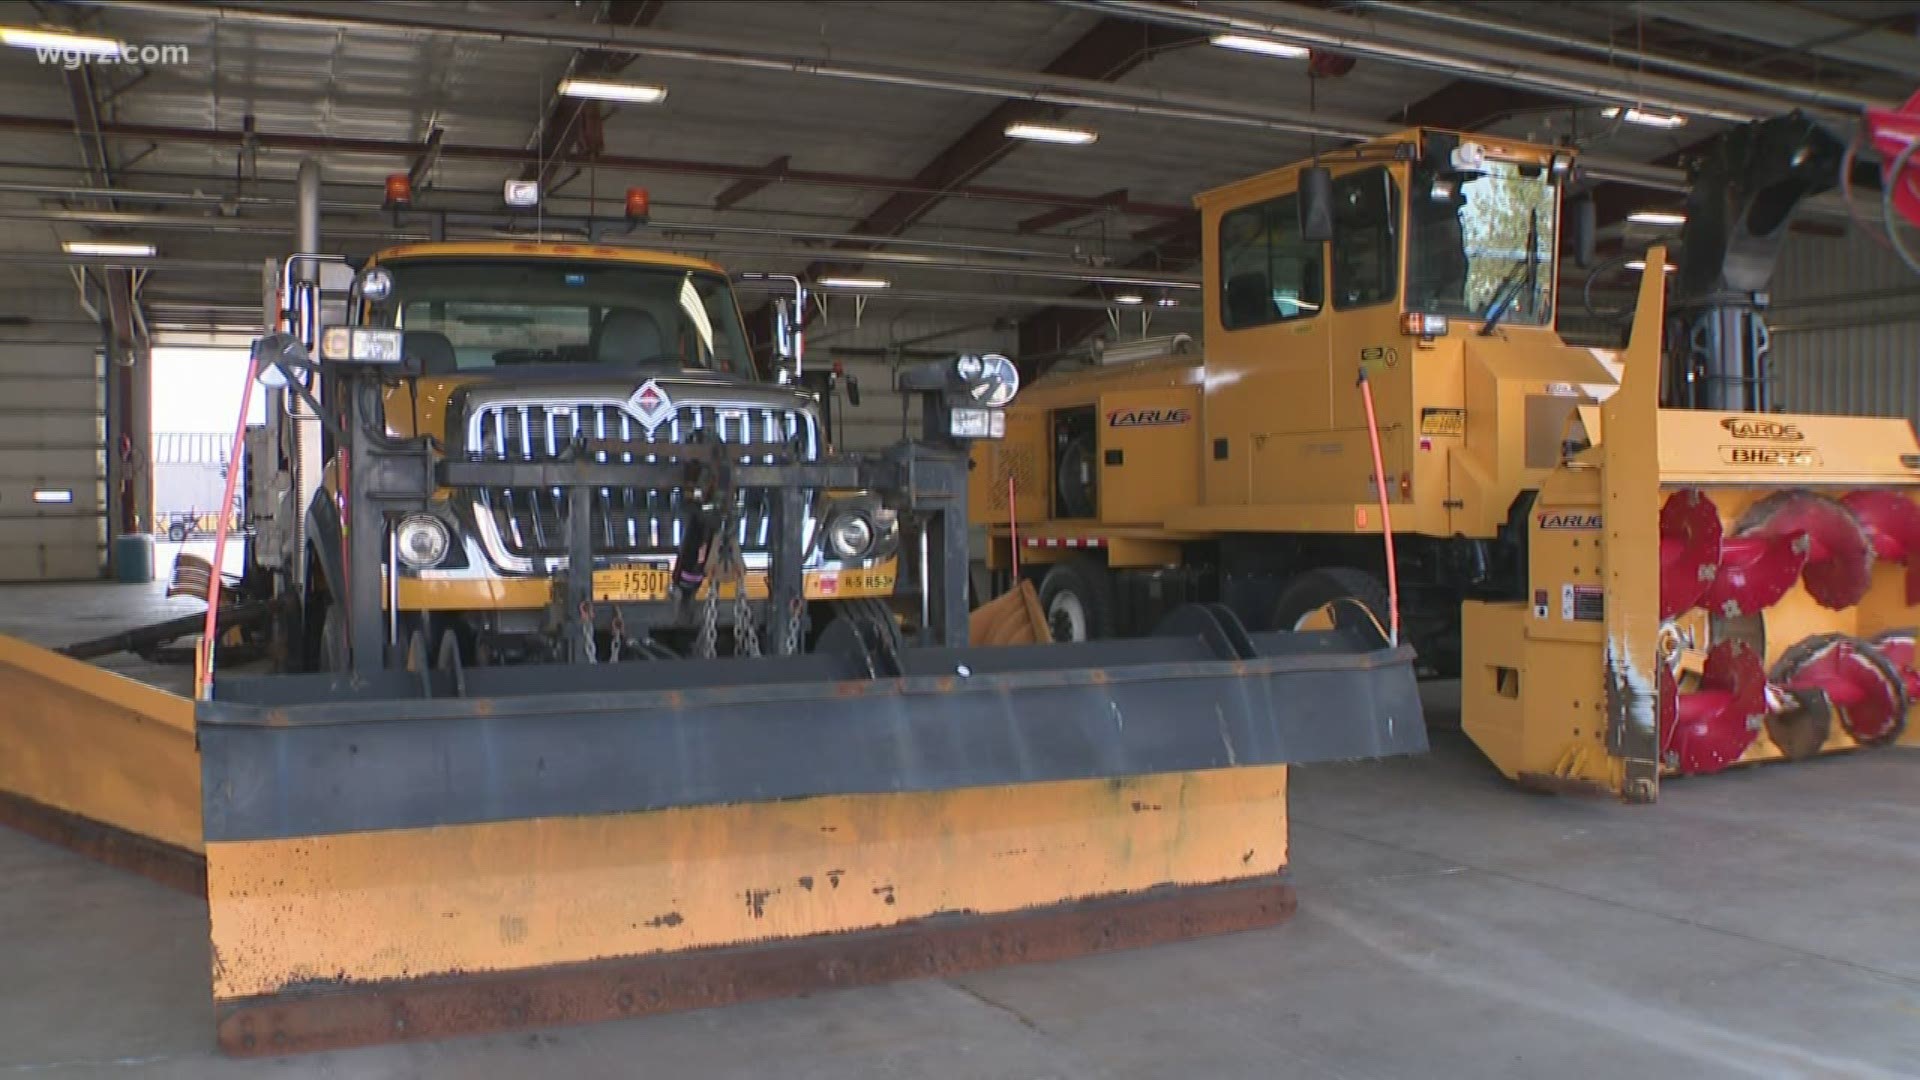 And now has 181 plow trucks ready to clear Western New York roadways